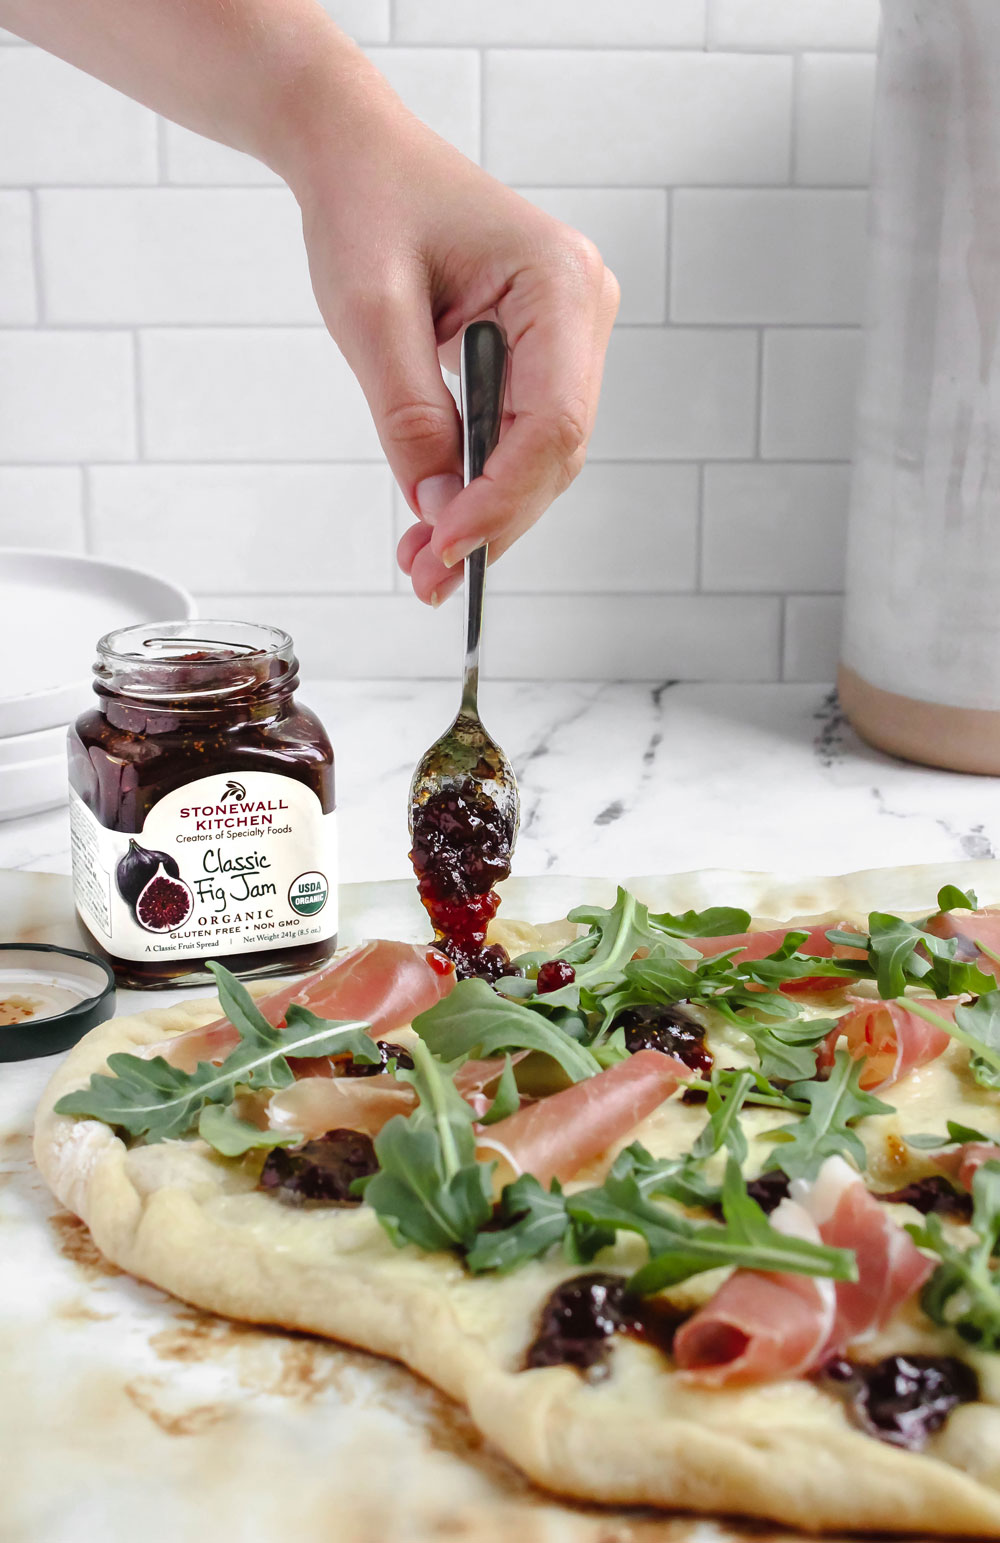 An image of a jar of fig jam next to a prosciutto, brie, and fig jam pizza on a kitchen counter with a white tile backsplash. A hand comes down from the top of the image and scoops some fig jam on the pizza.